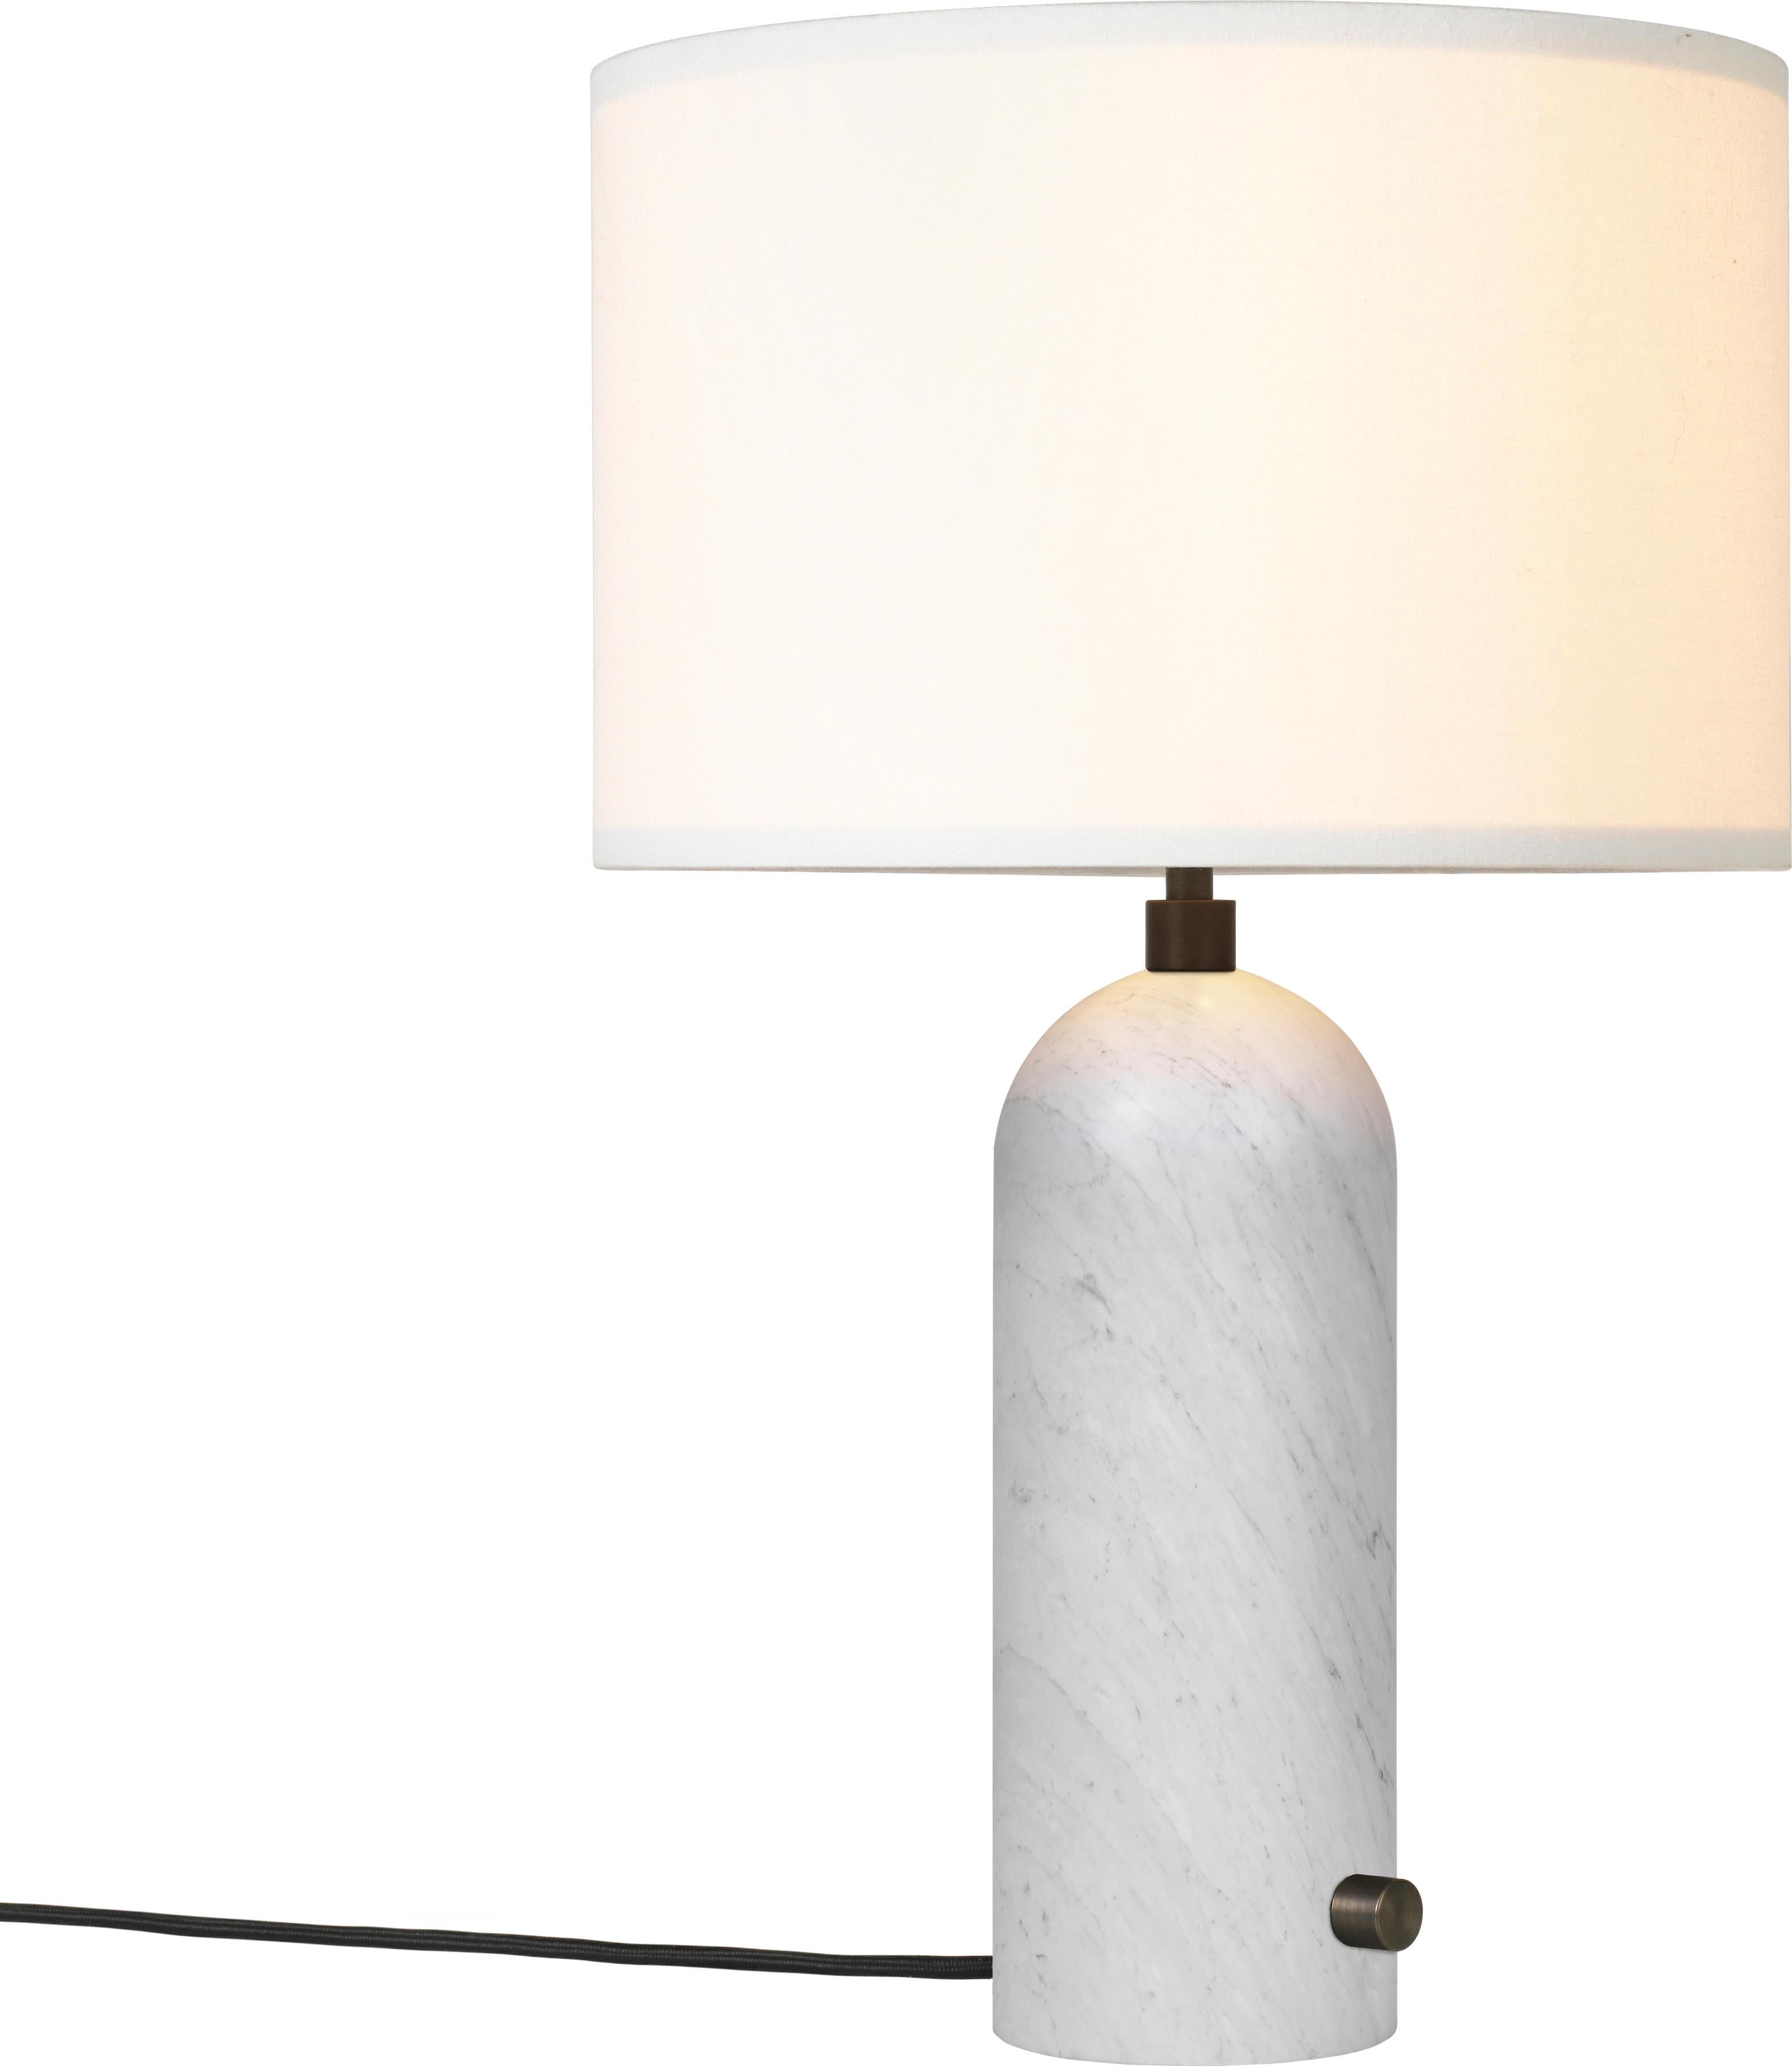 Large 'Gravity' Blackened Steel Table Lamp by Space Copenhagen for Gubi For Sale 10